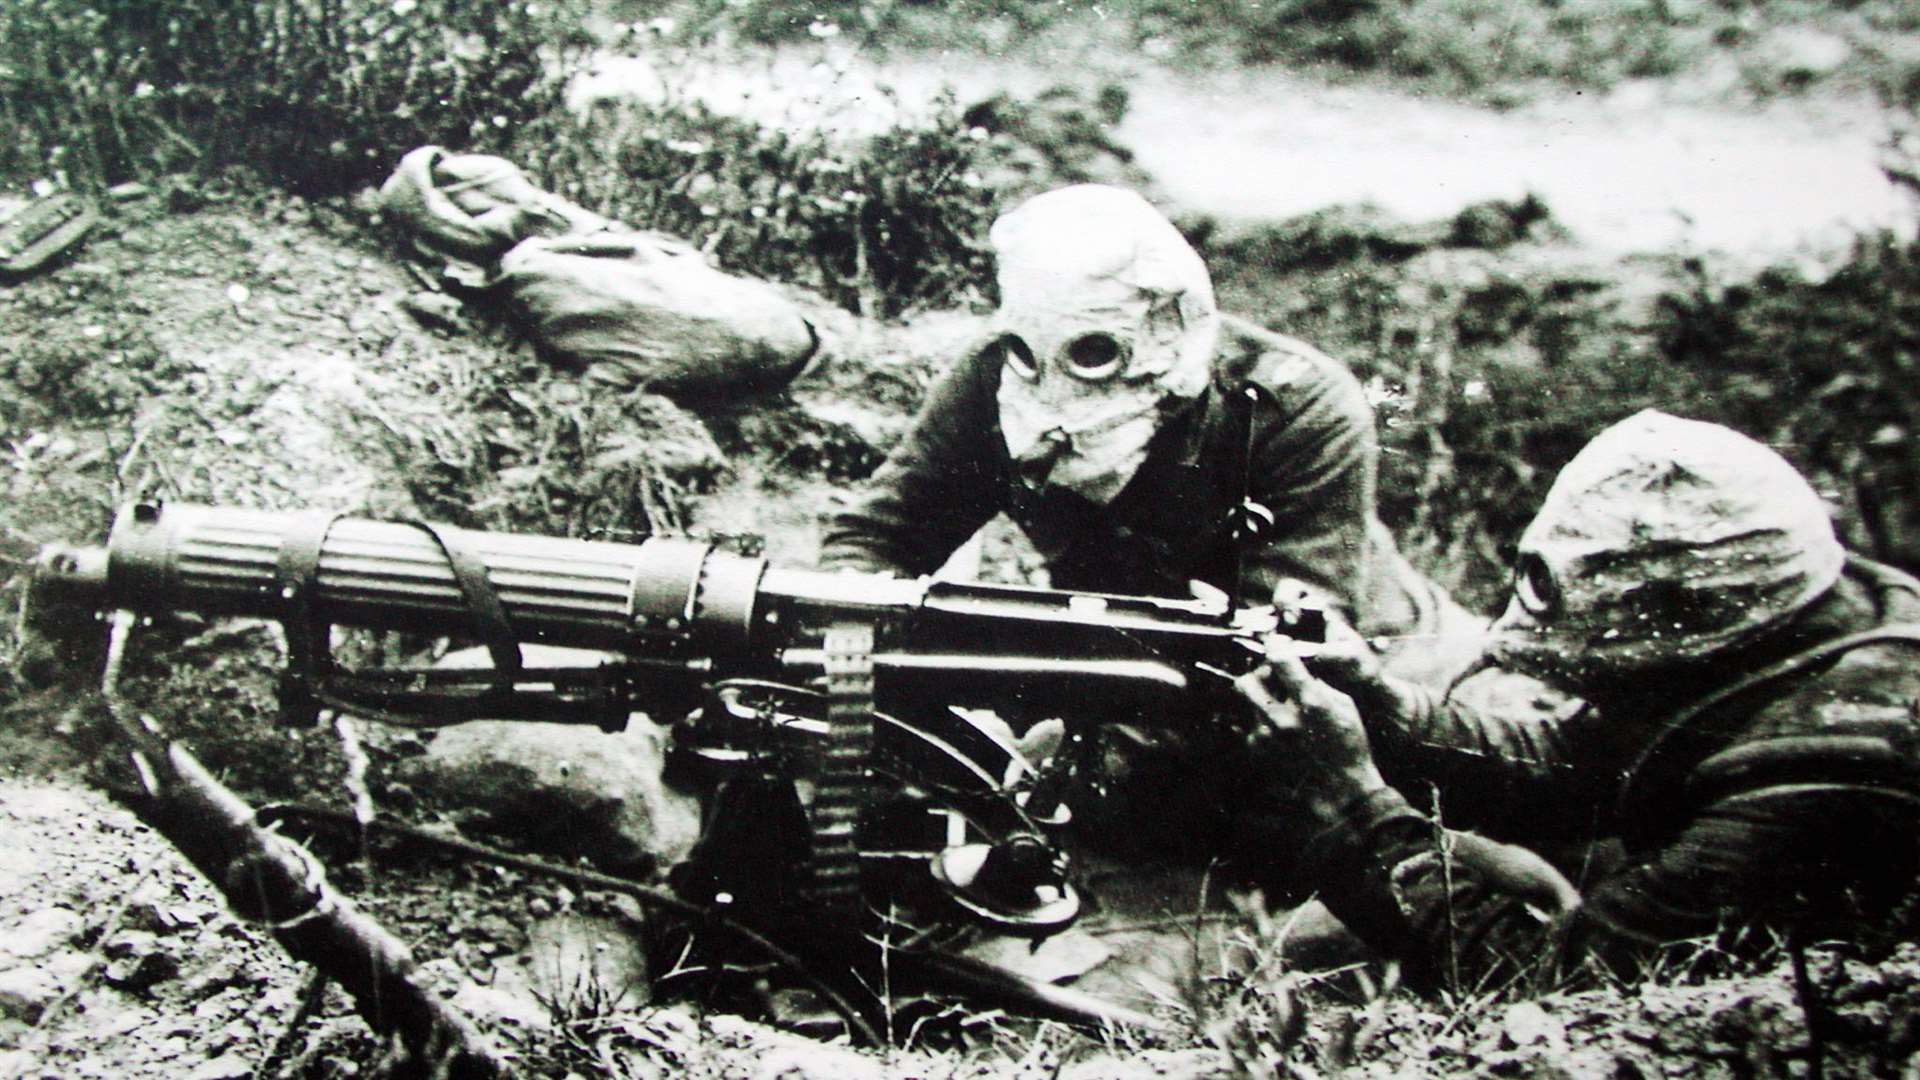 British machine gunners wearing gas masks in the Battle of the Somme.